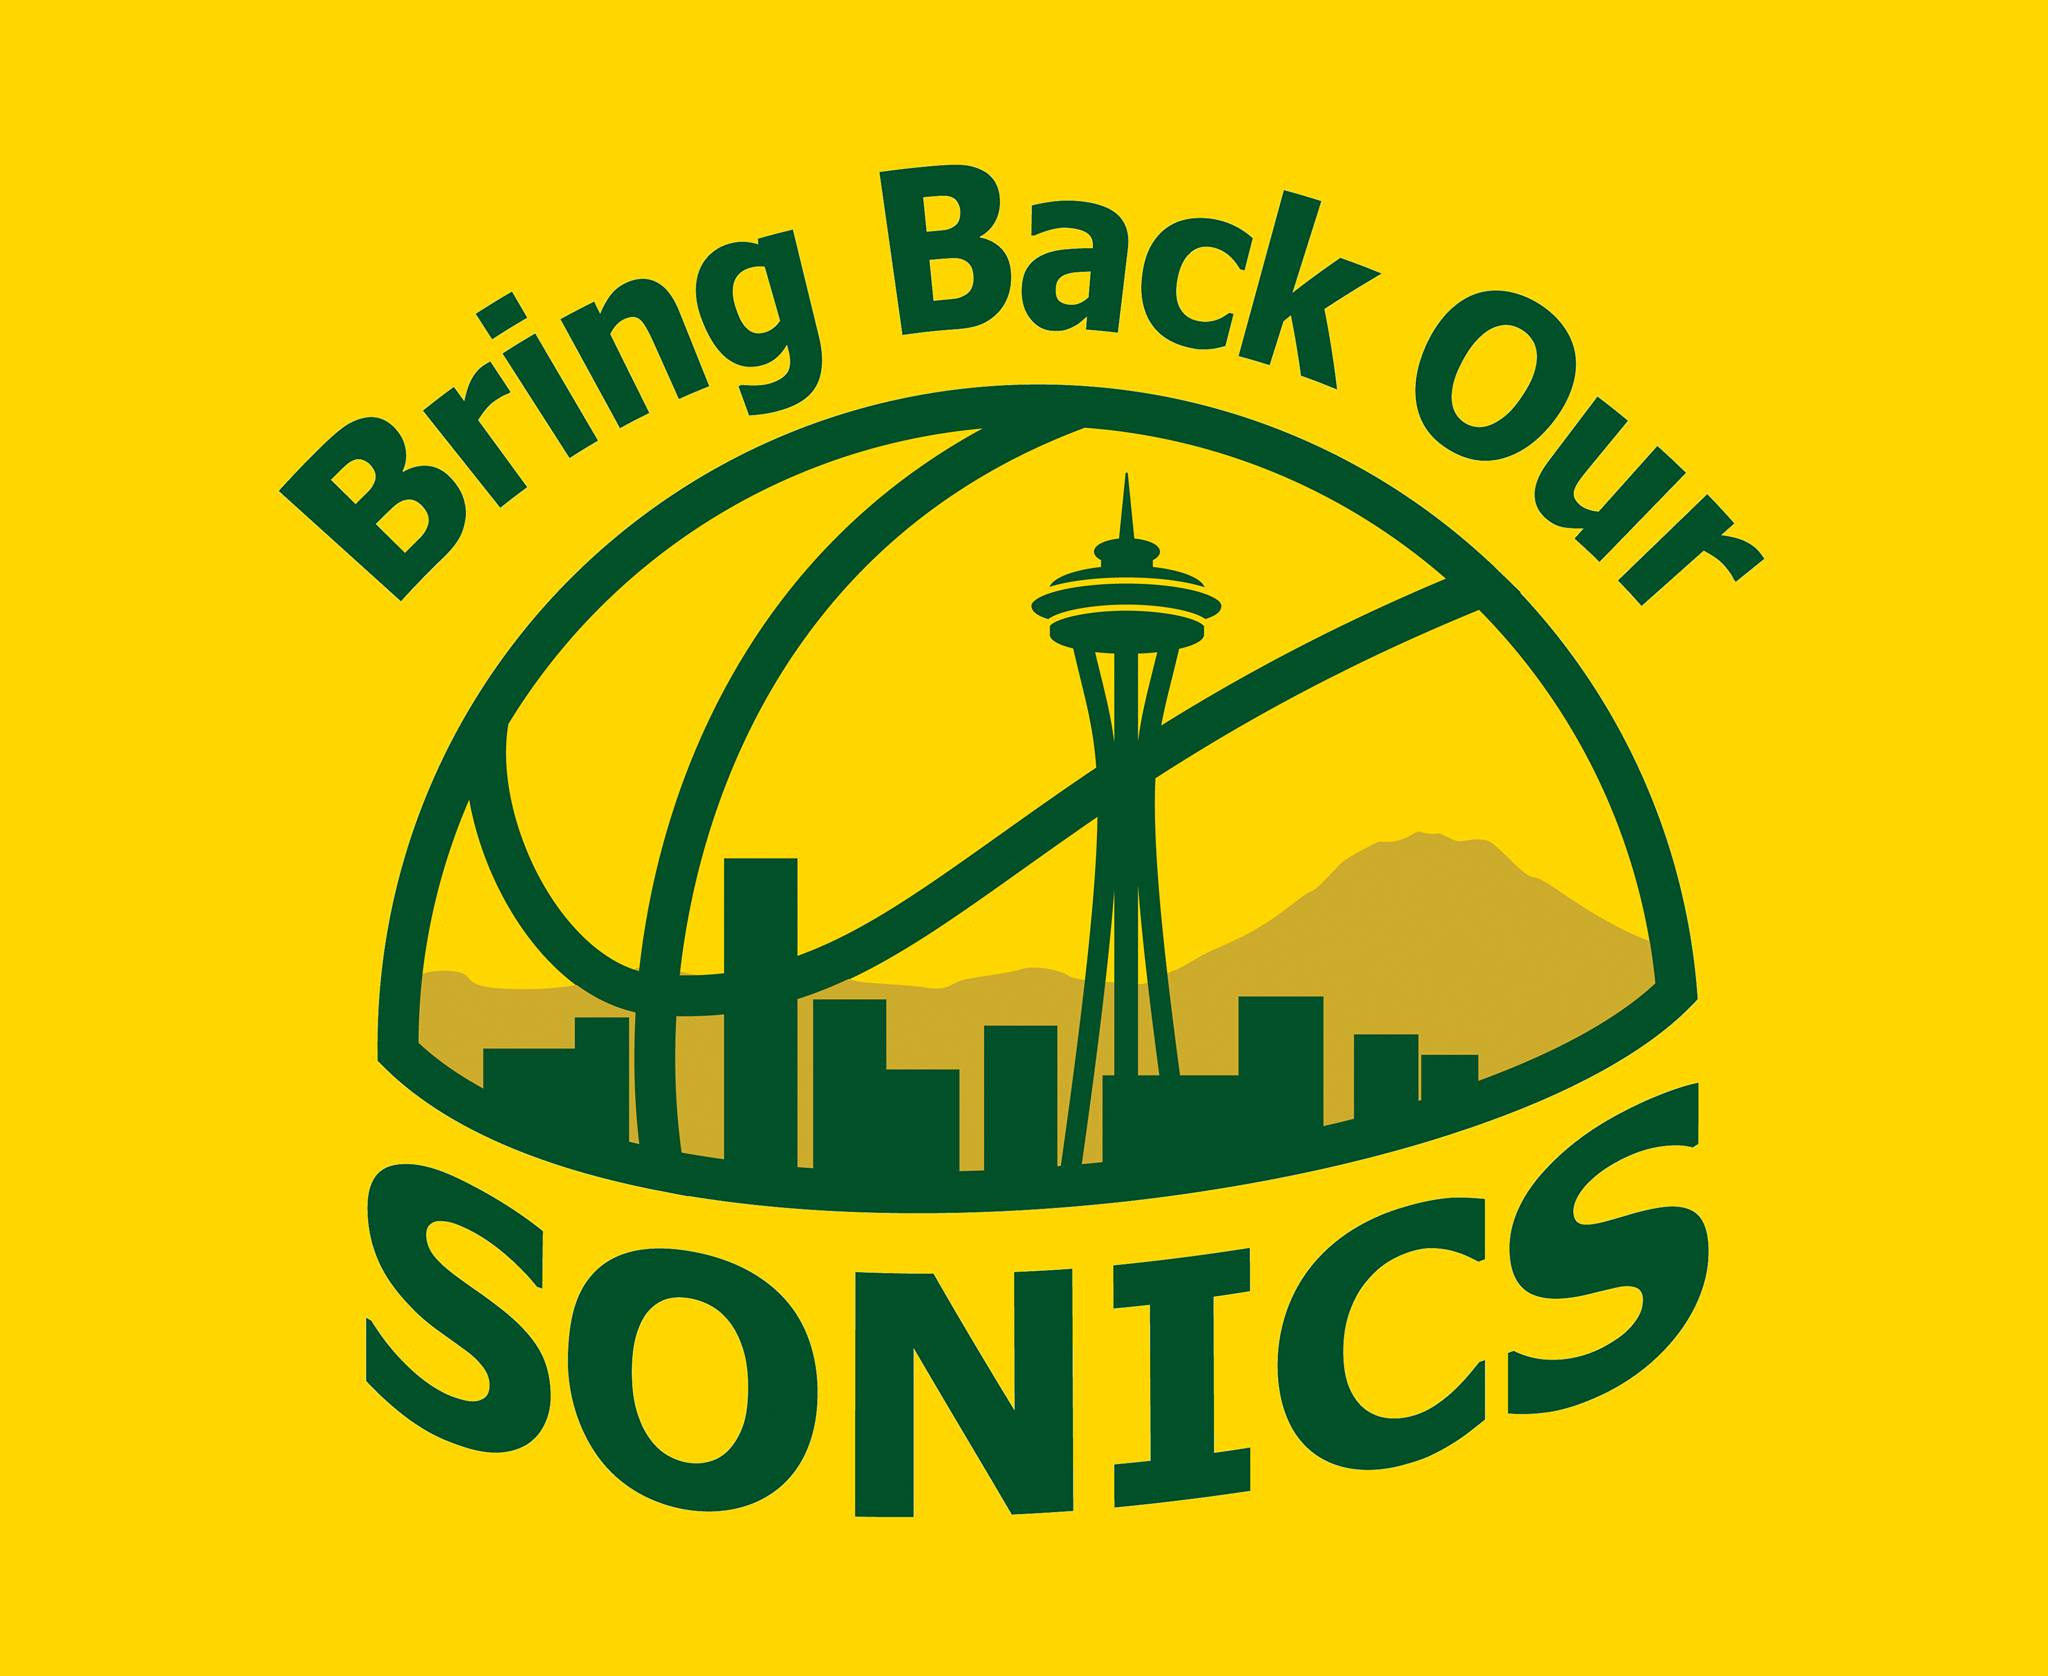 The Ten Greatest Players in Supersonics History - #1 - Sonics Rising